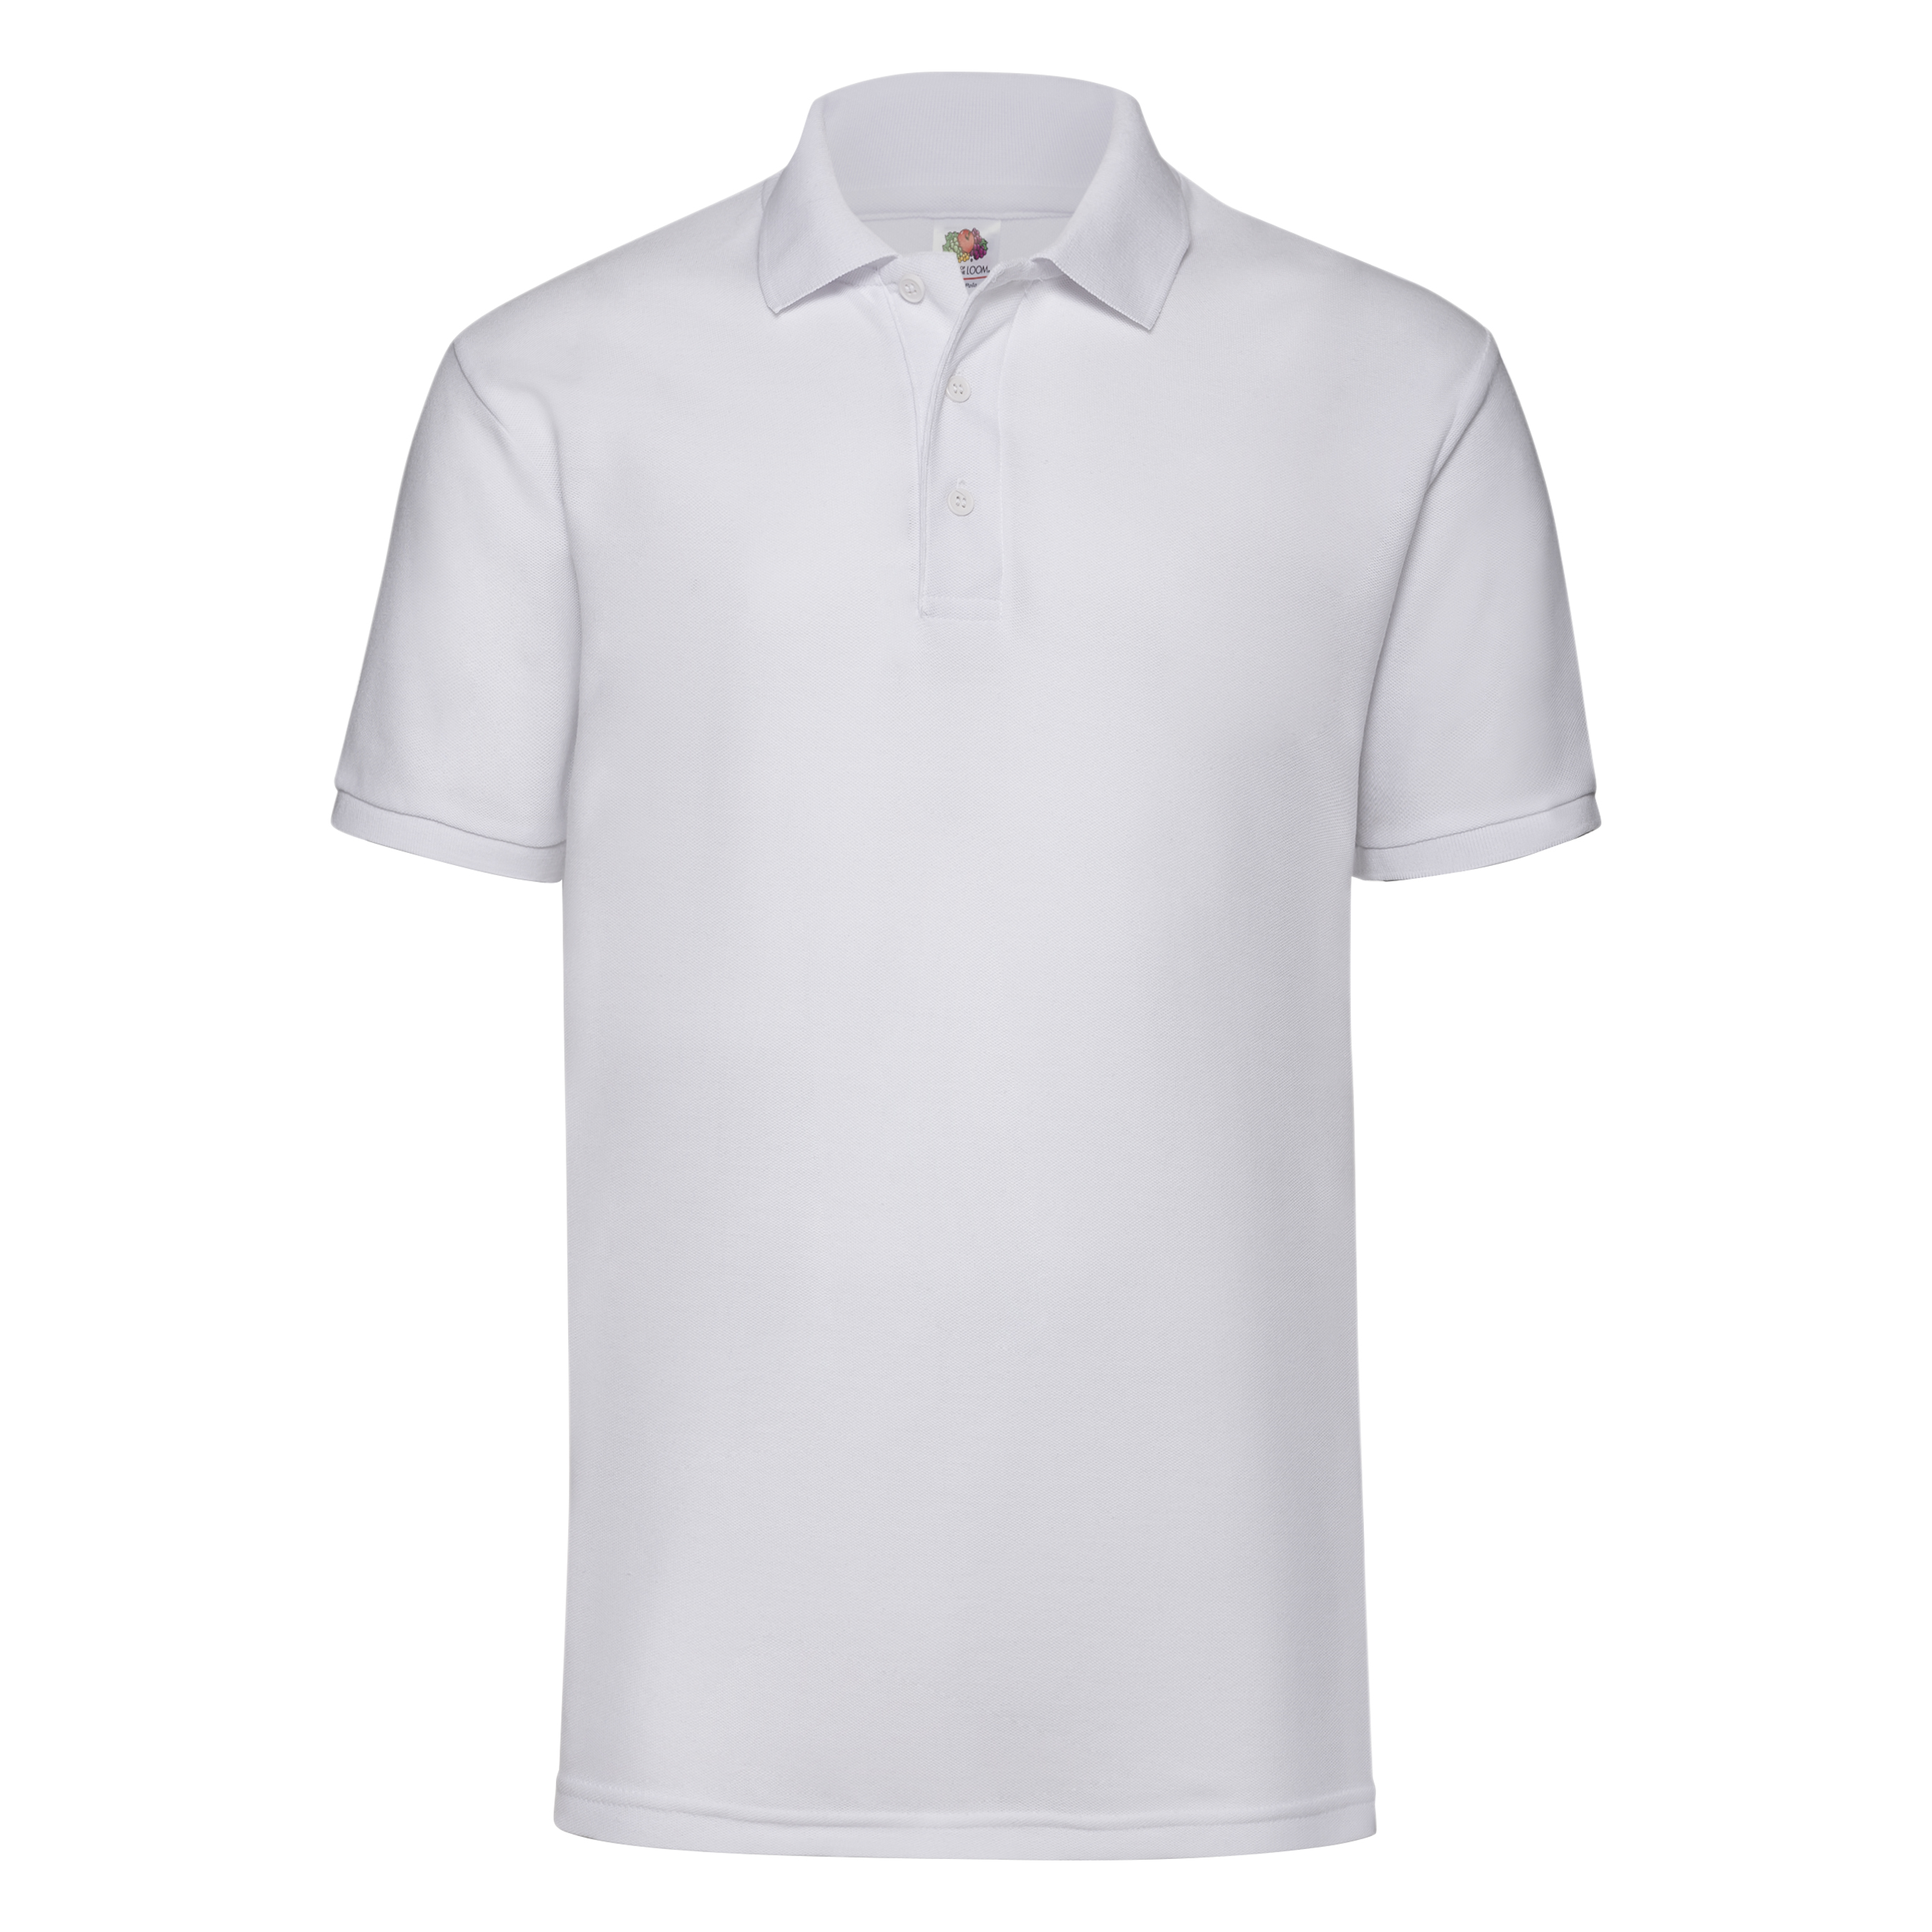 ax-httpswebsystems.s3.amazonaws.comtmp_for_downloadfruit-of-the-loom-65-35-polo-white.jpg